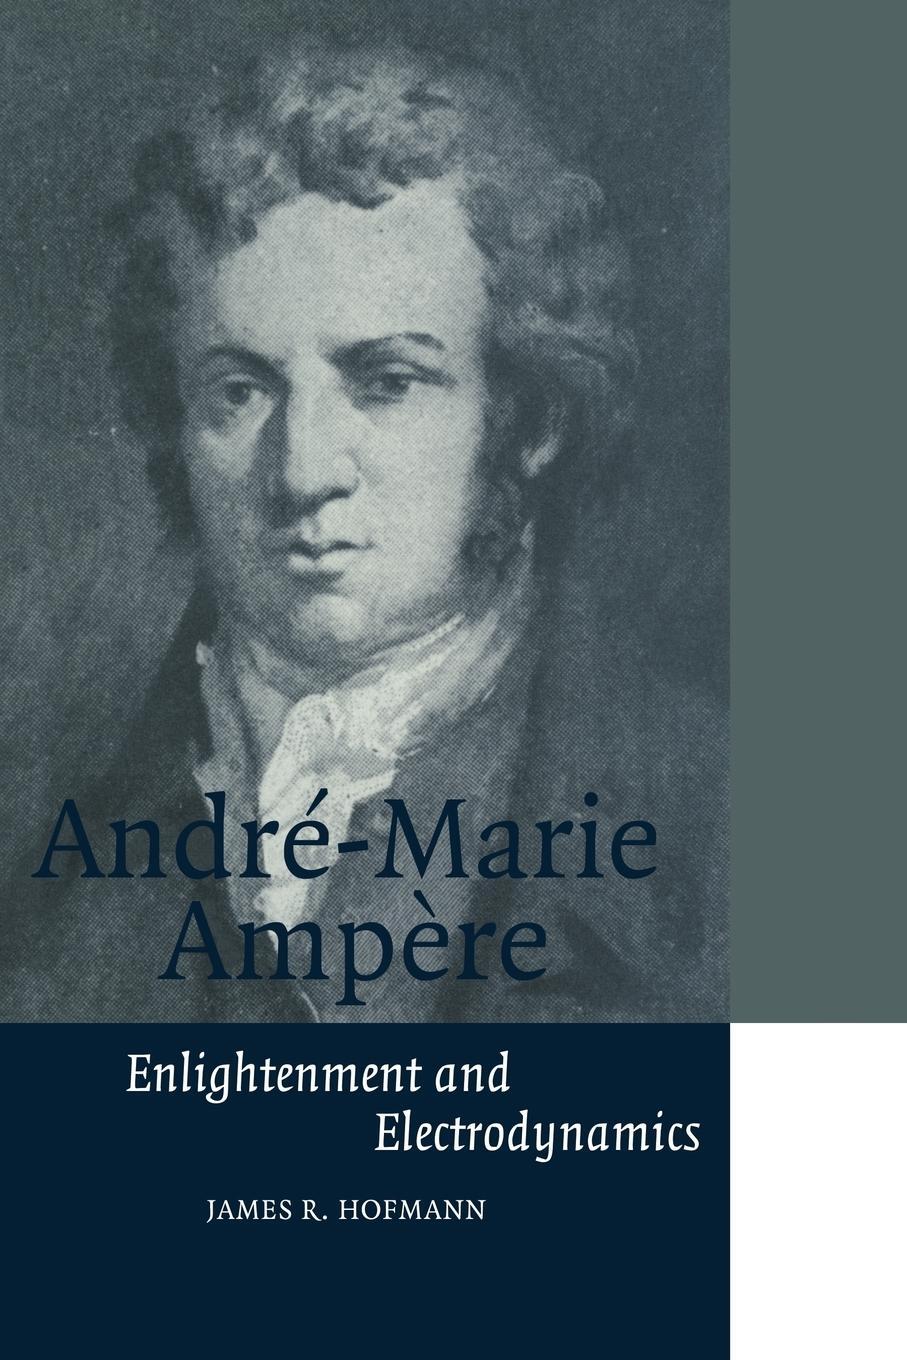 Cover: 9780521566704 | Andre-Marie Ampere | Enlightenment and Electrodynamics | Hofmann